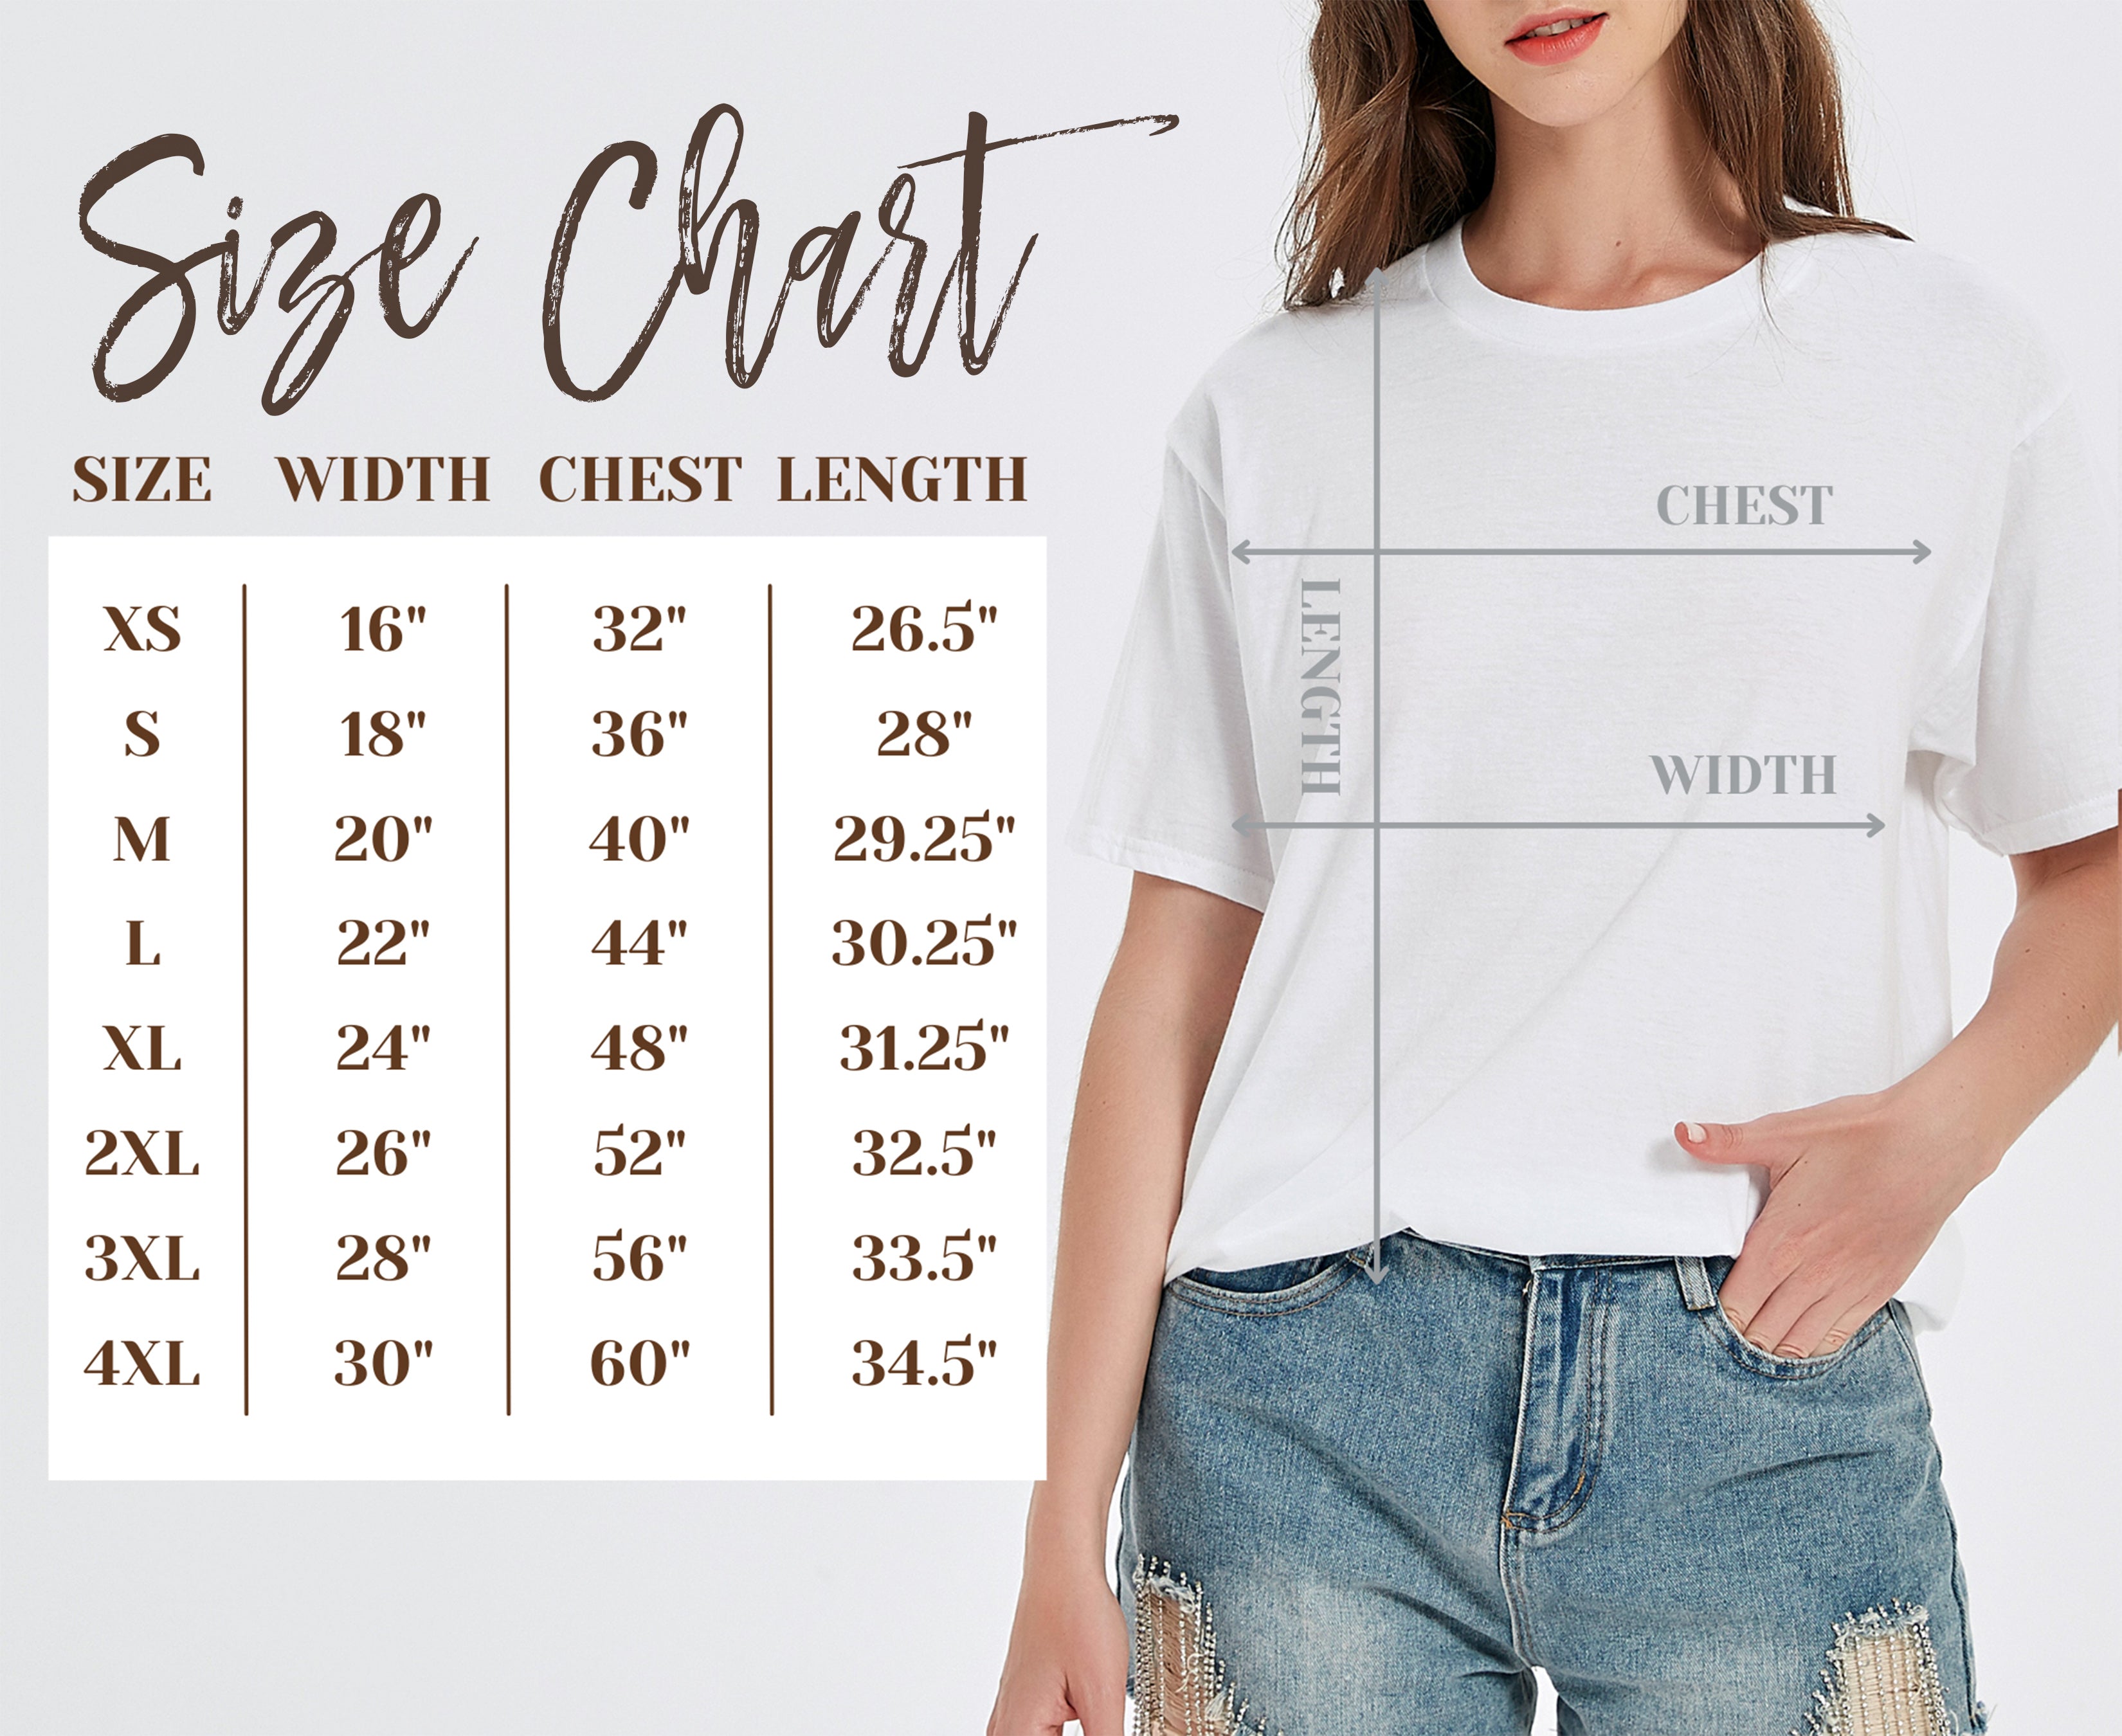 A woman wearing a First Grade Crew T-Shirt with a size chart, perfect for gifting.